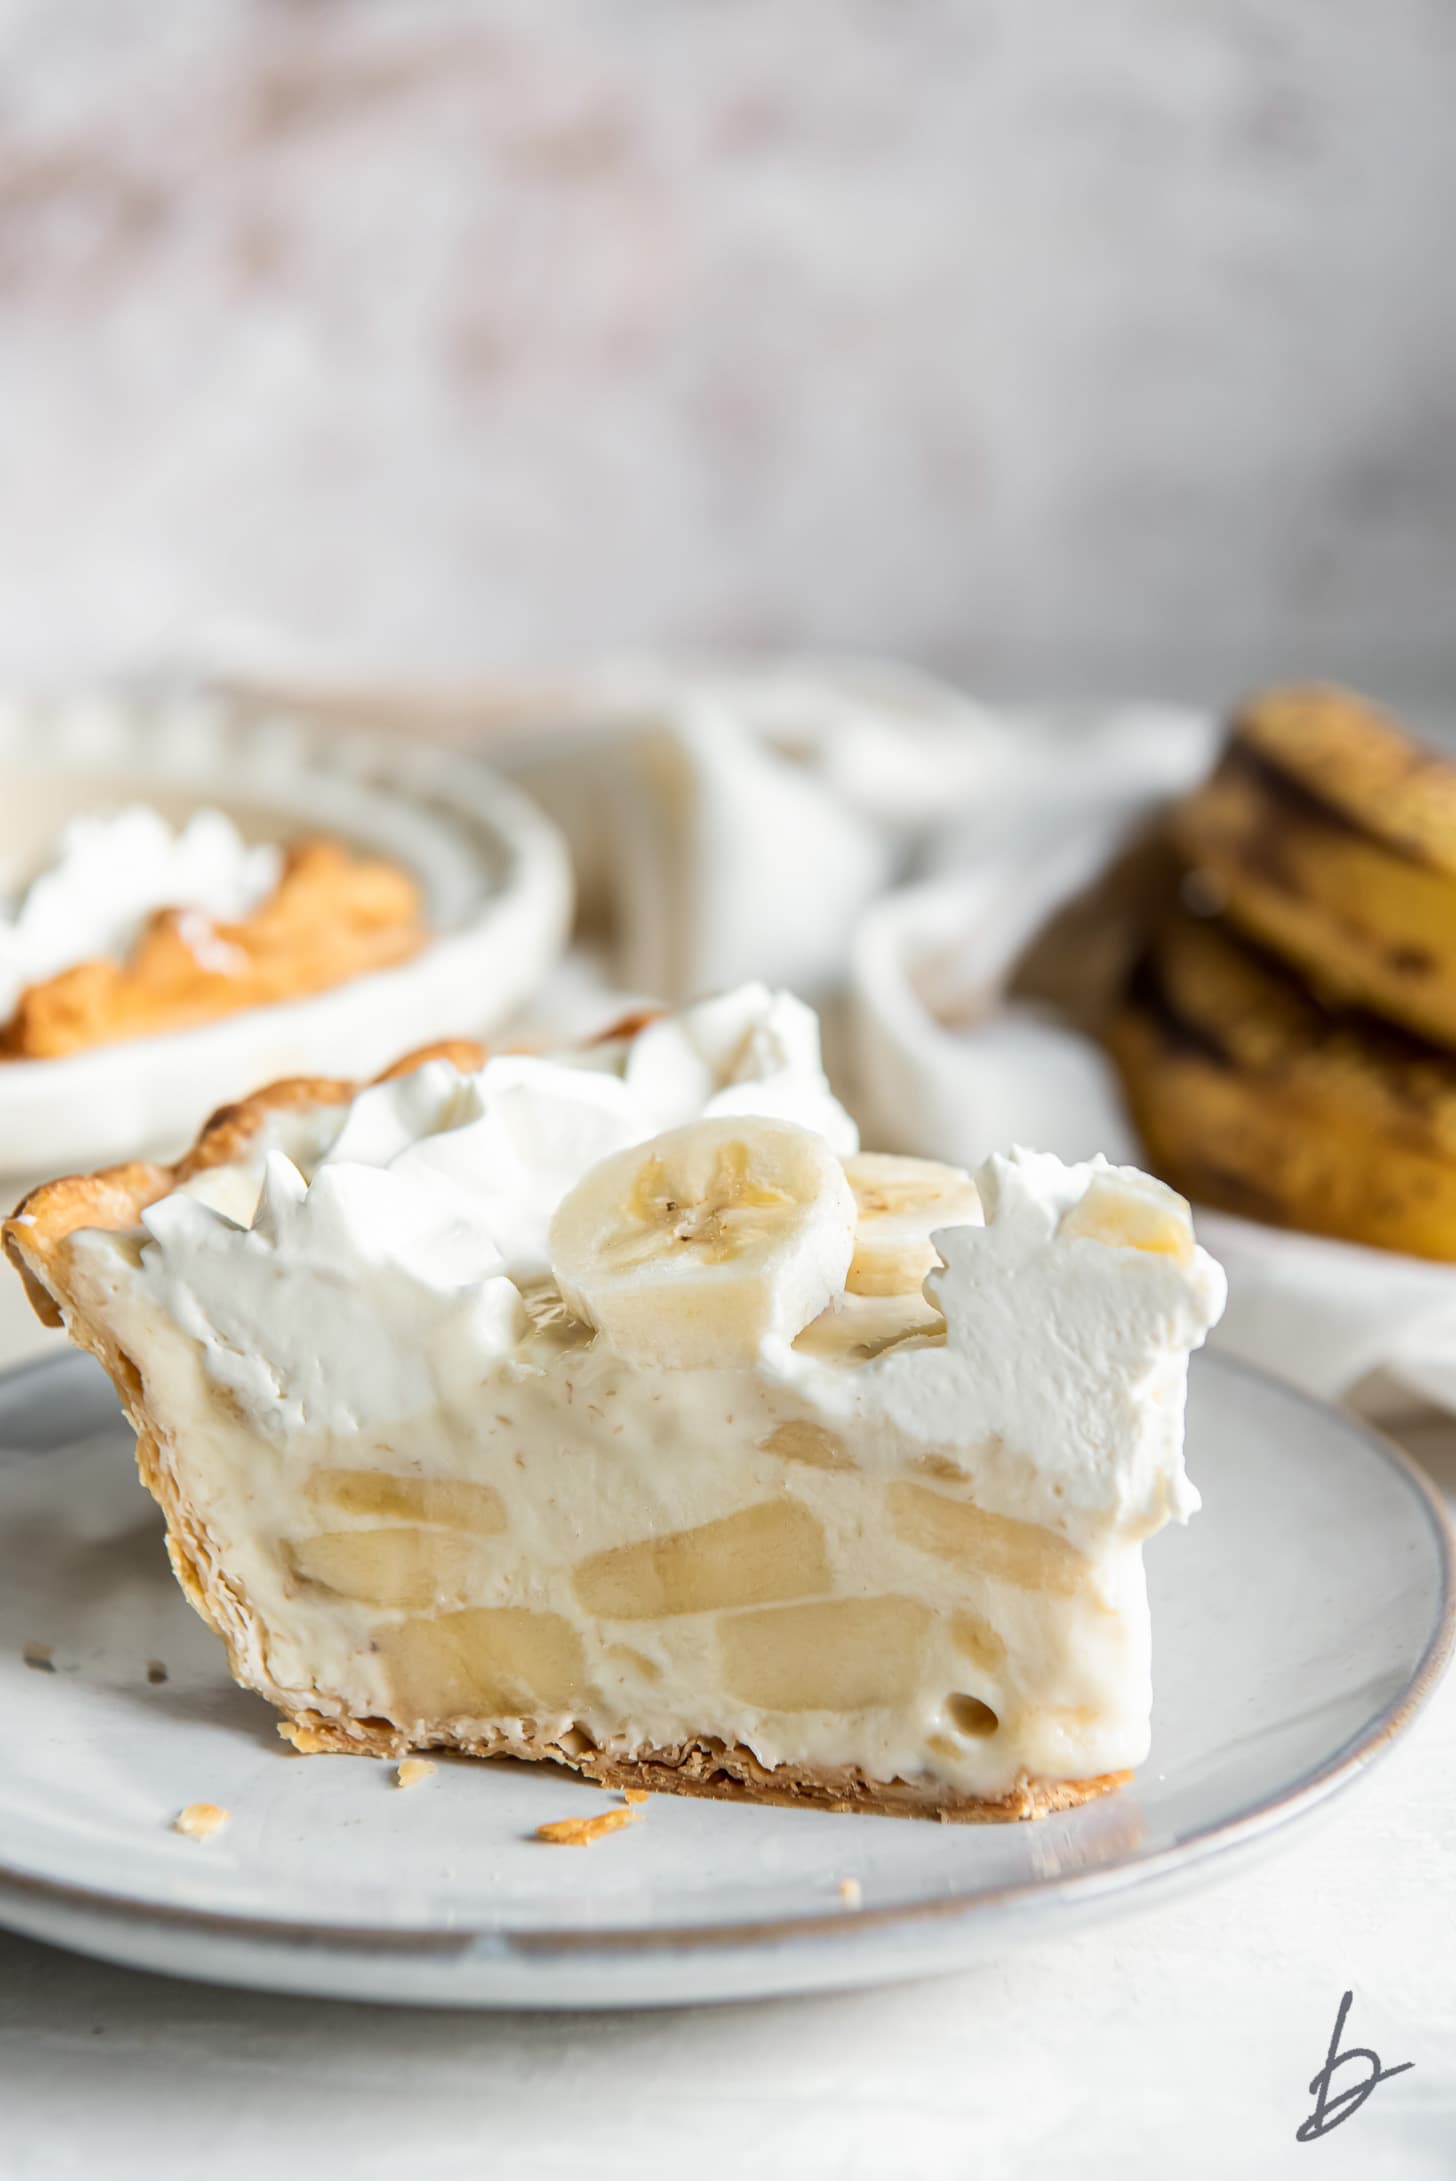 slice of banana cream pie with side showing banana slices inside custard filling